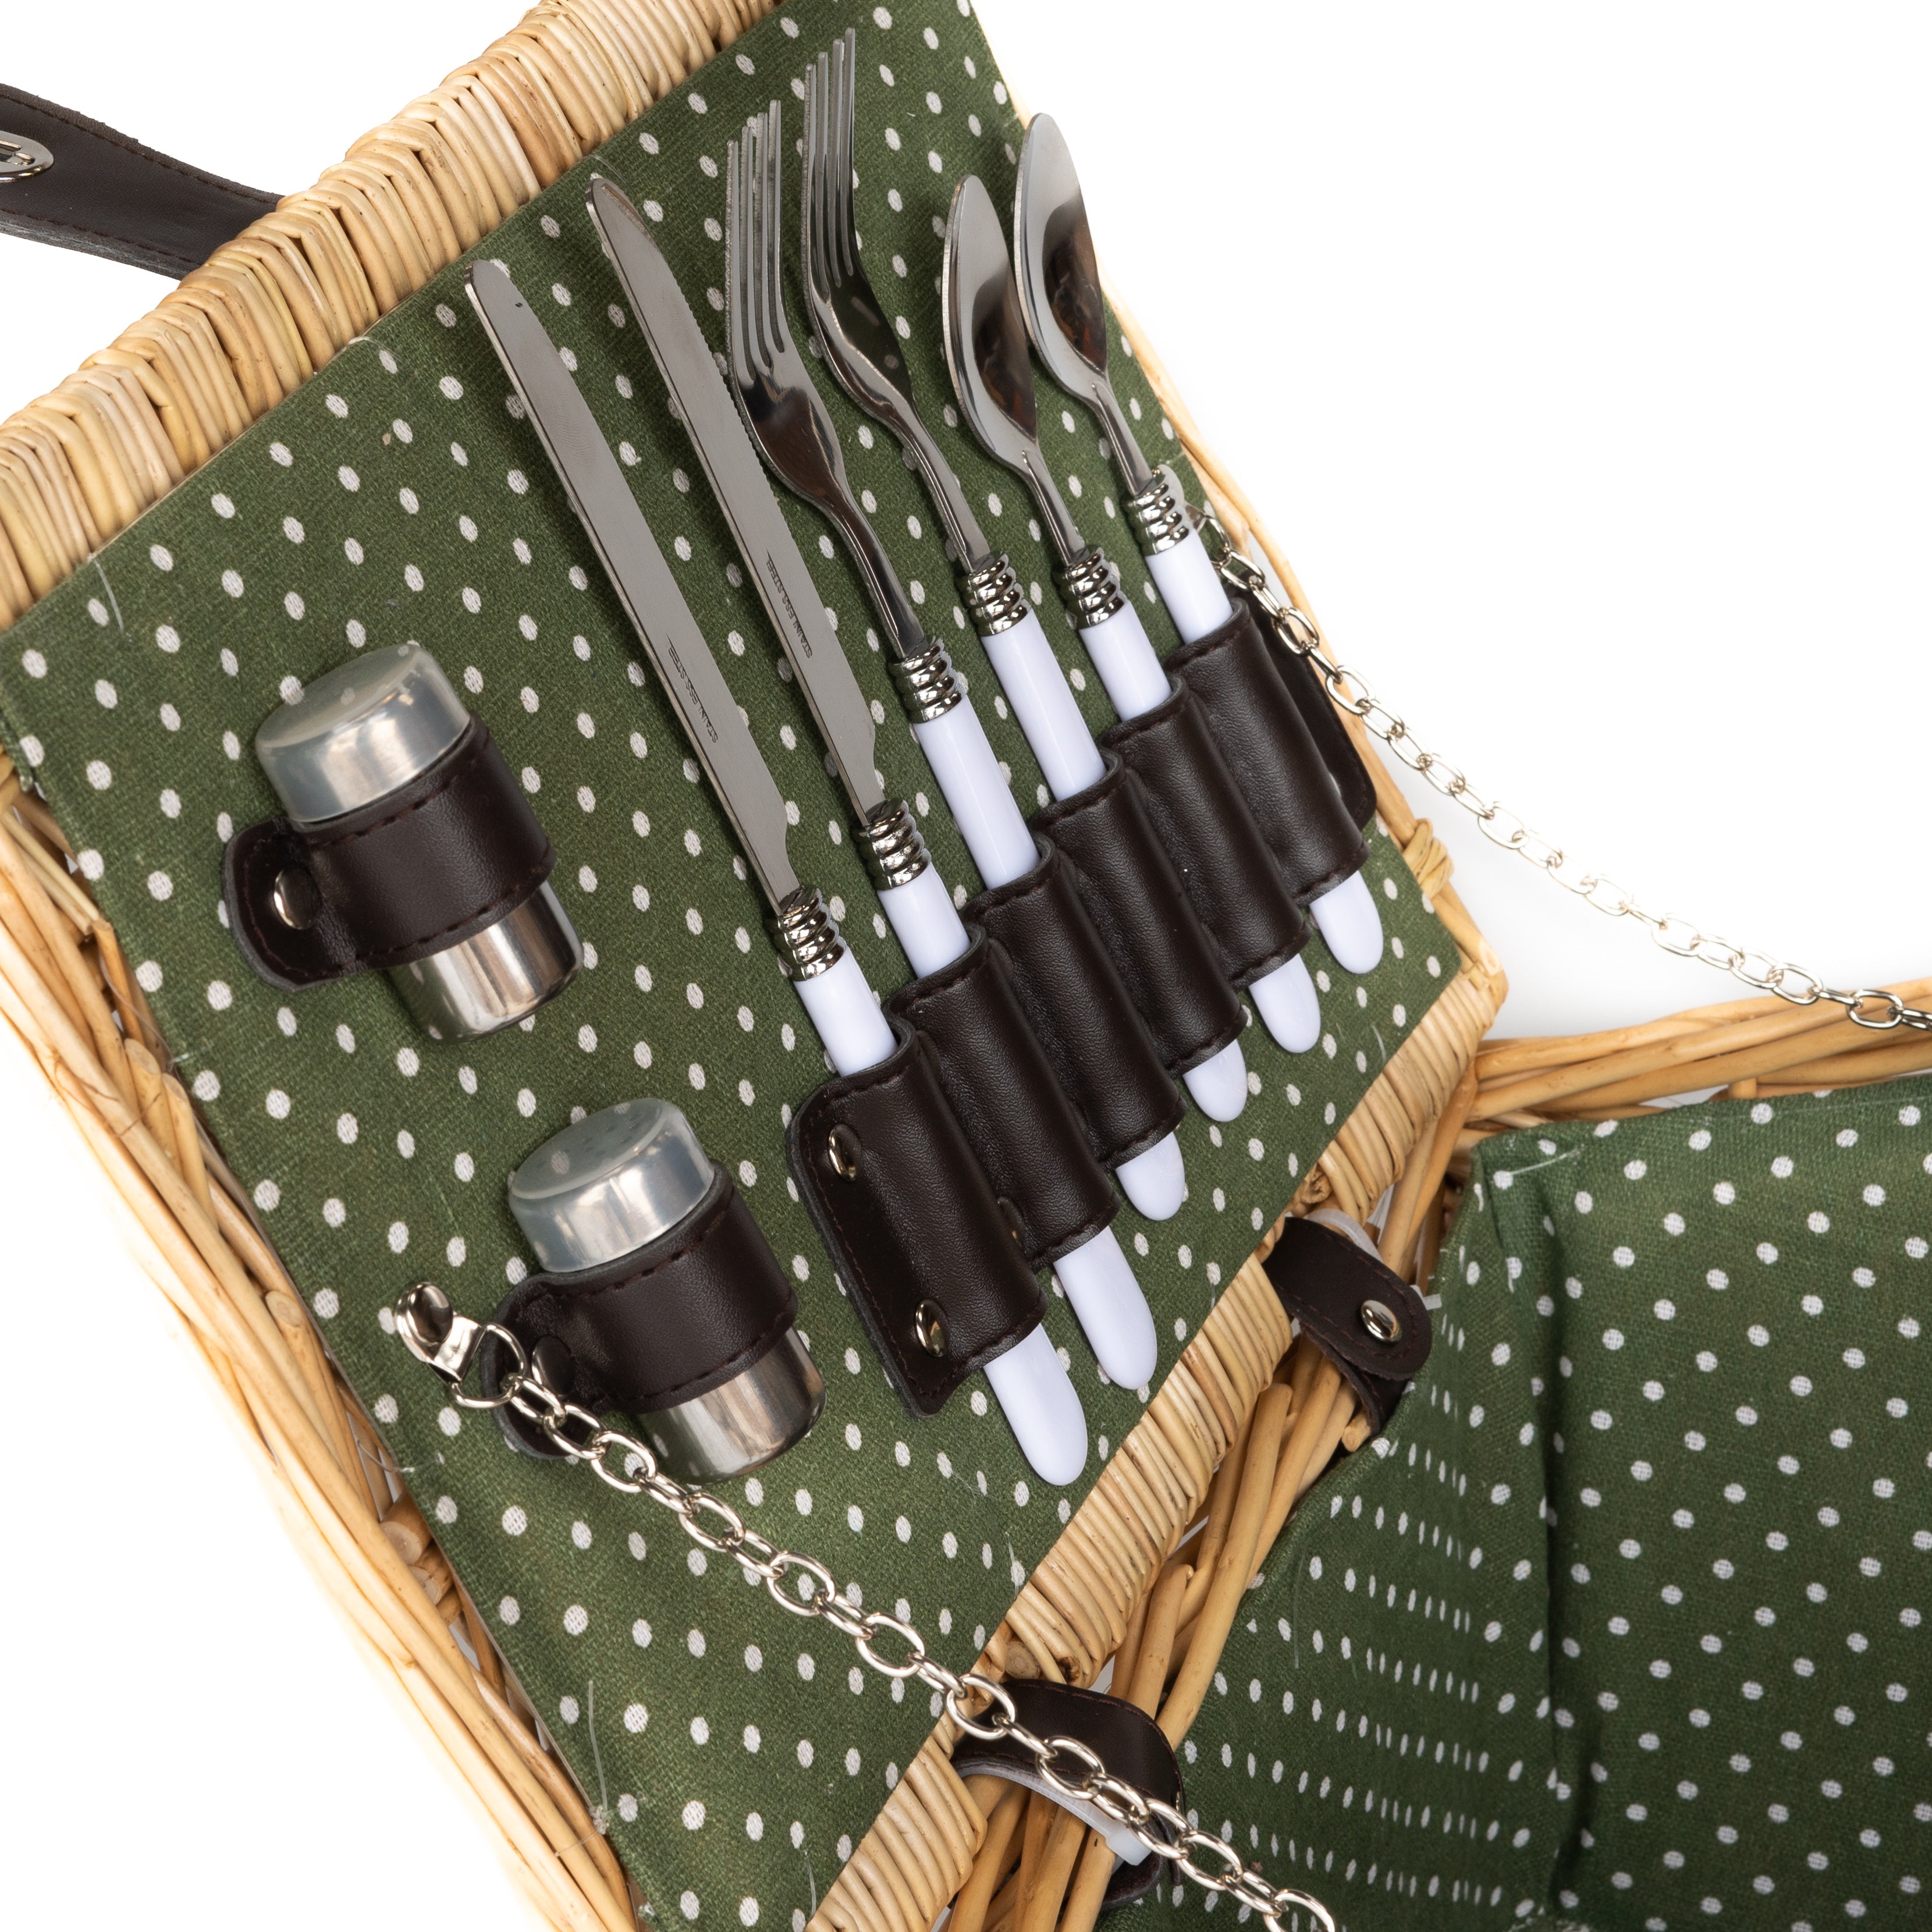 Deluxe Wicker Green Polka Dot Lining 4 Person Picnic Basket